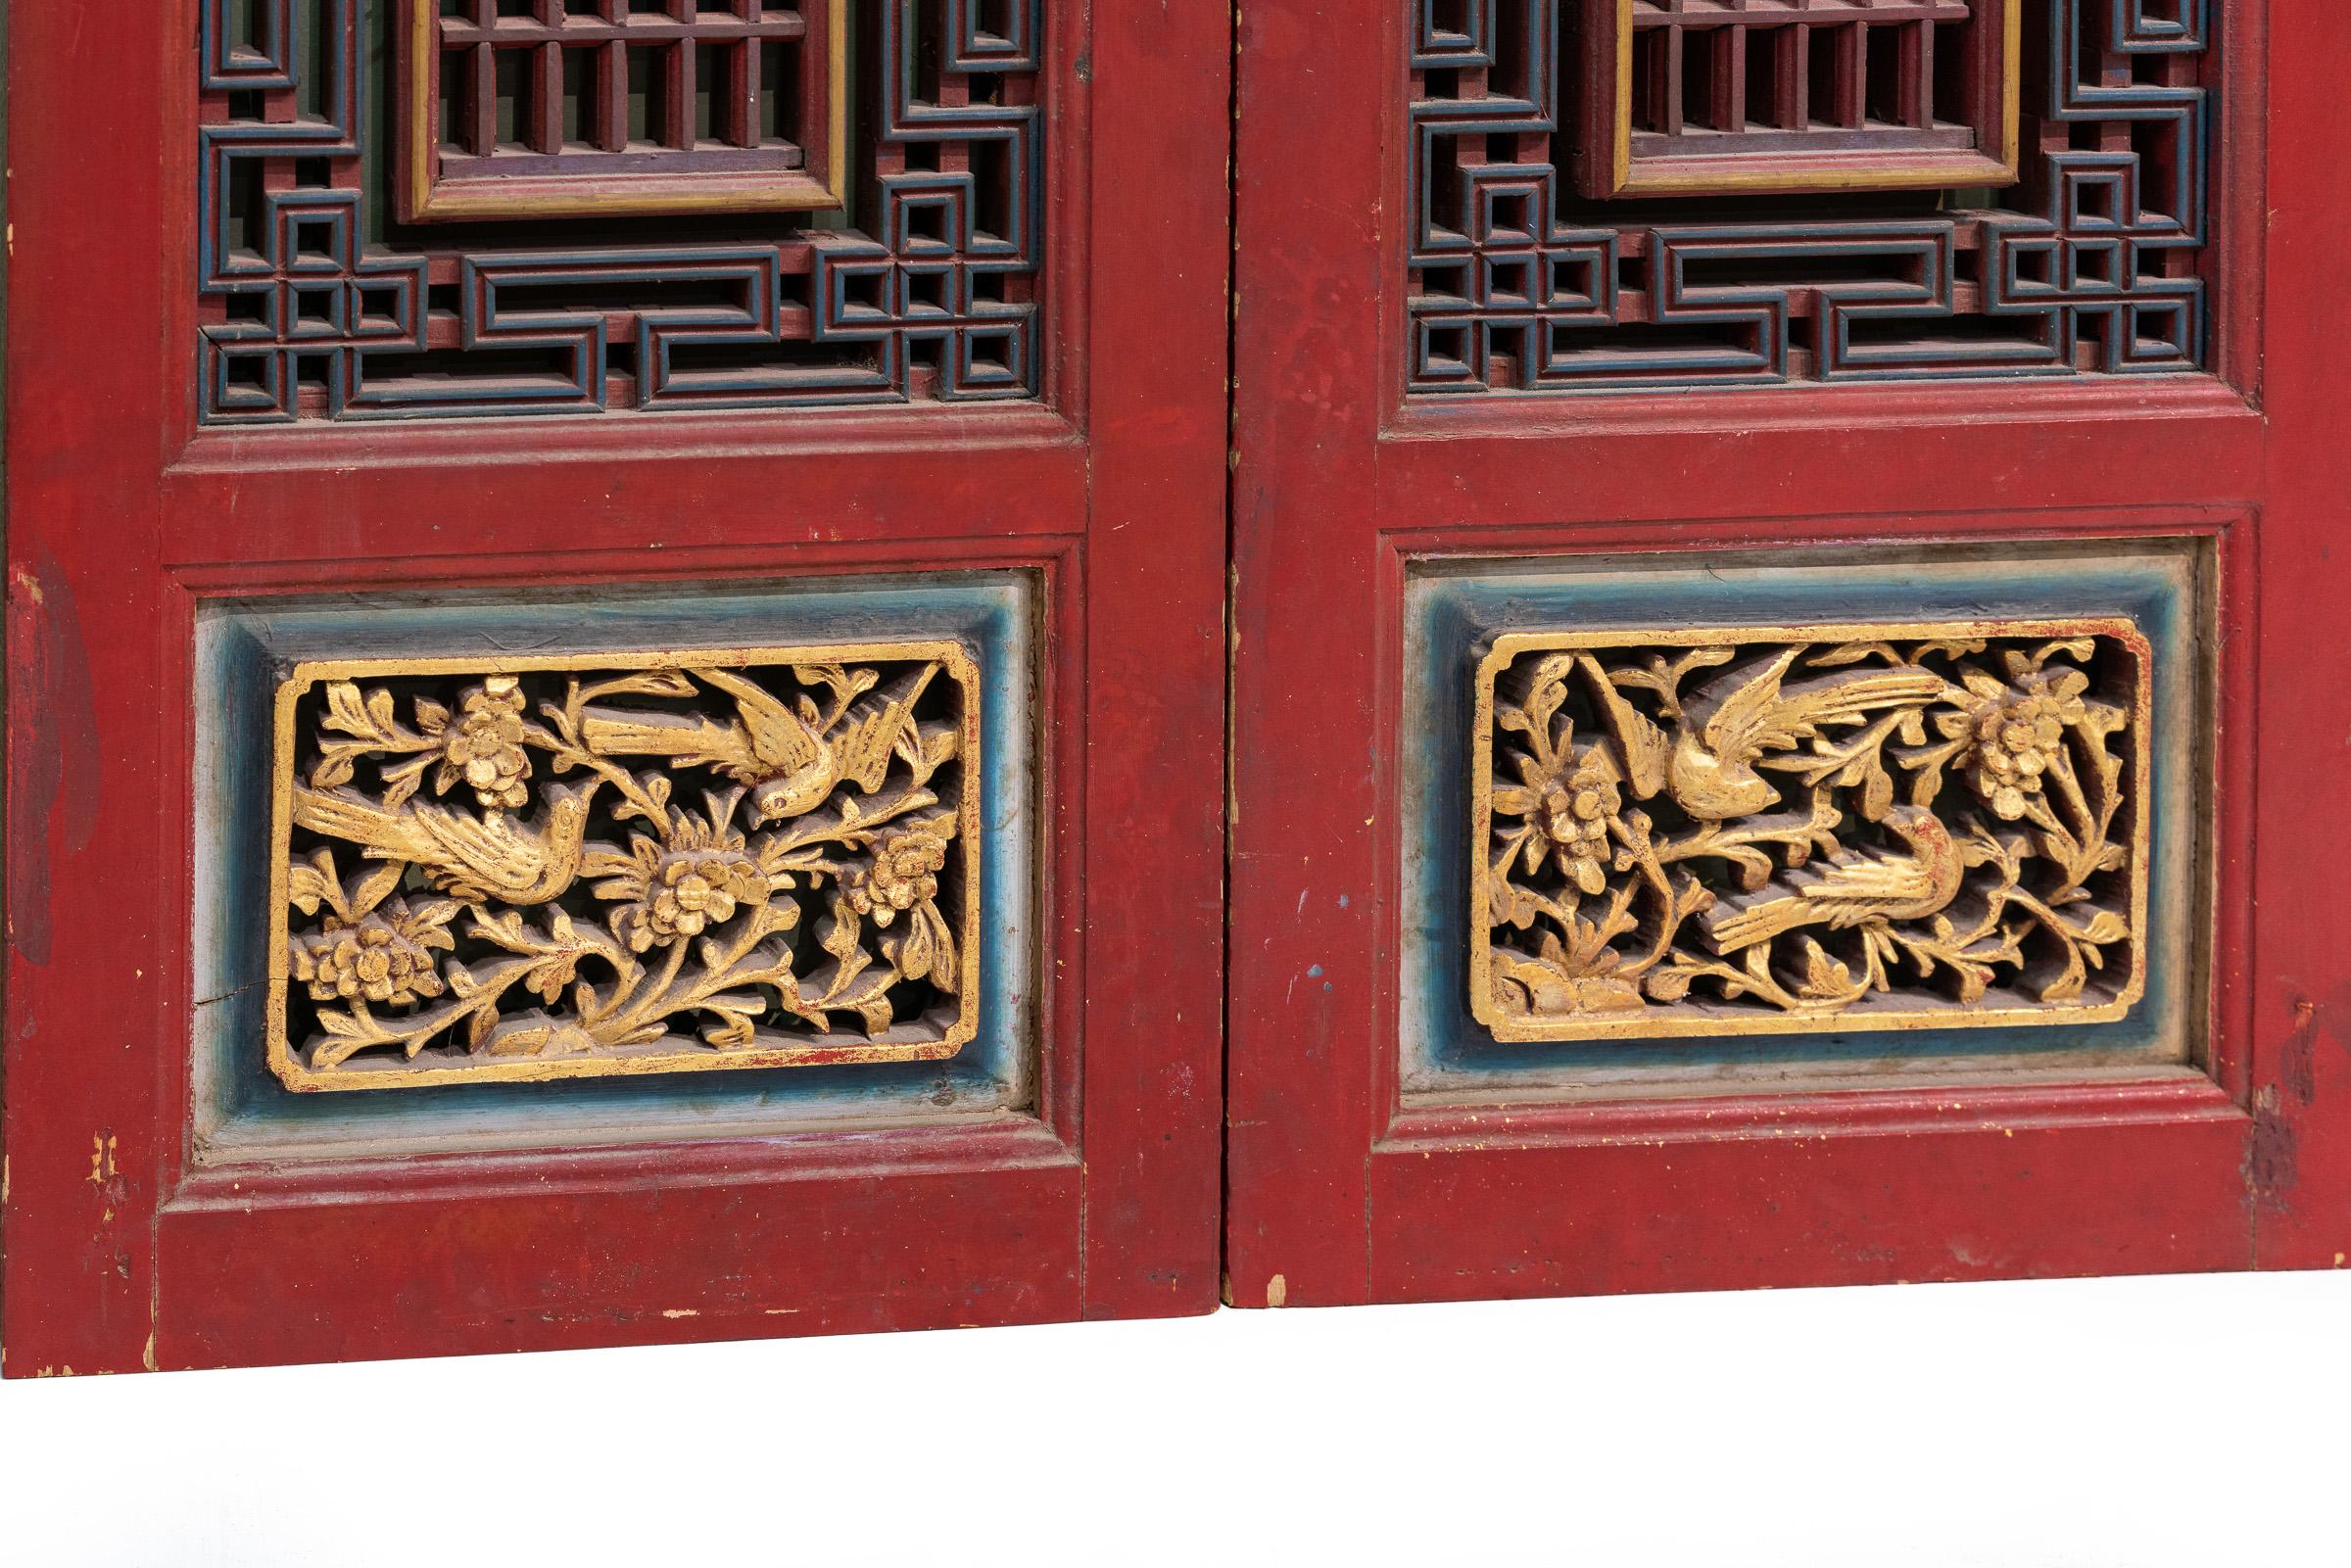 Carved Early 20th Century Window Carvings from Fujian, China